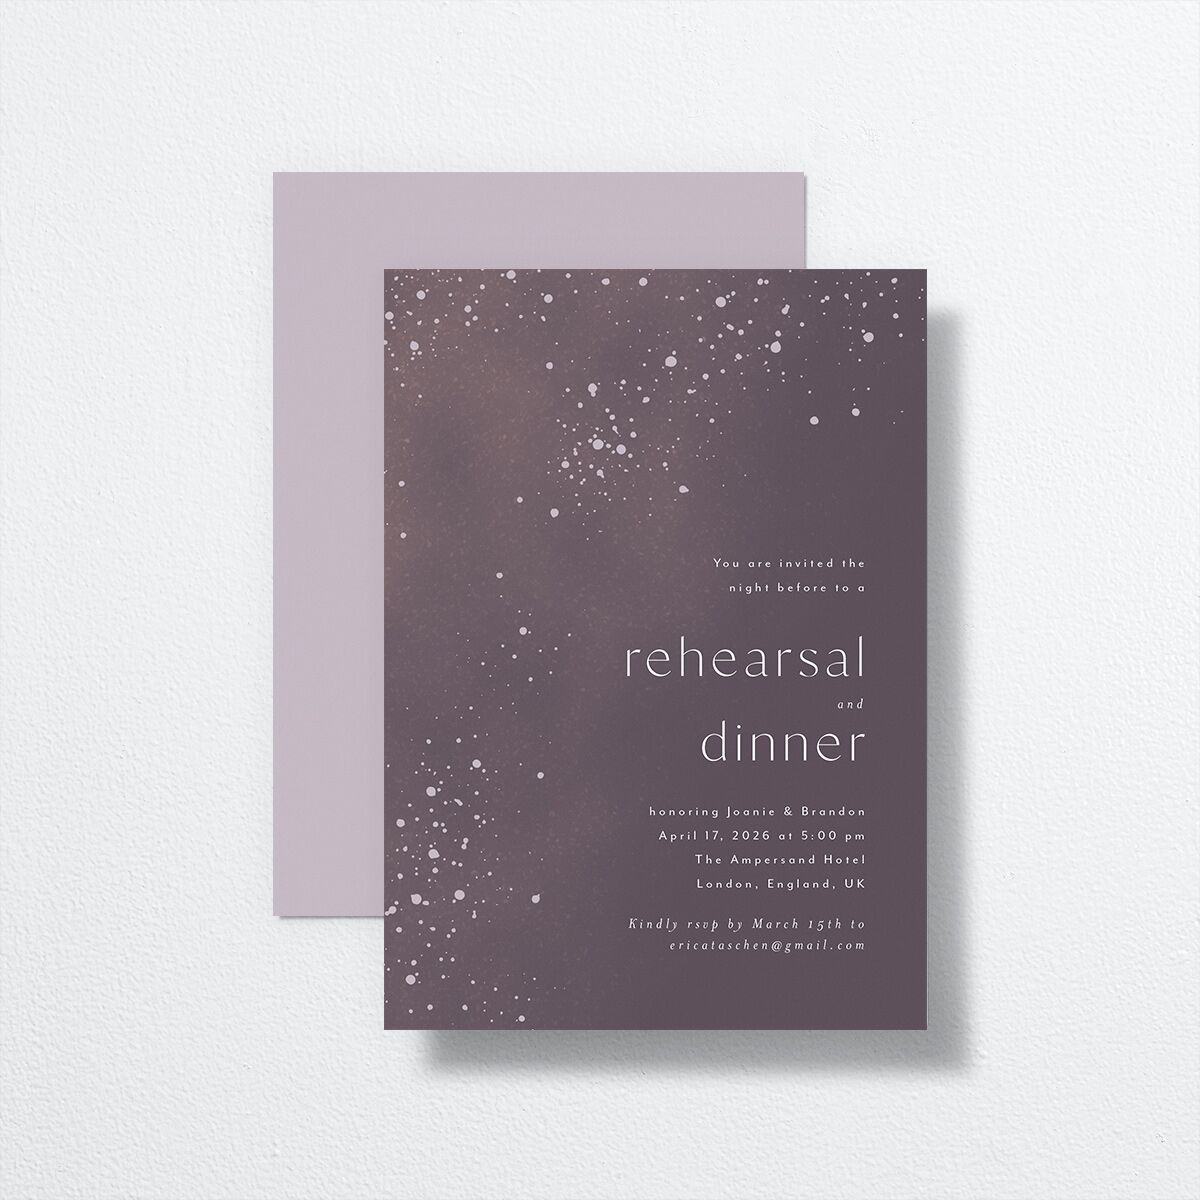 Shimmer Dust Rehearsal Dinner Invitations front-and-back in purple